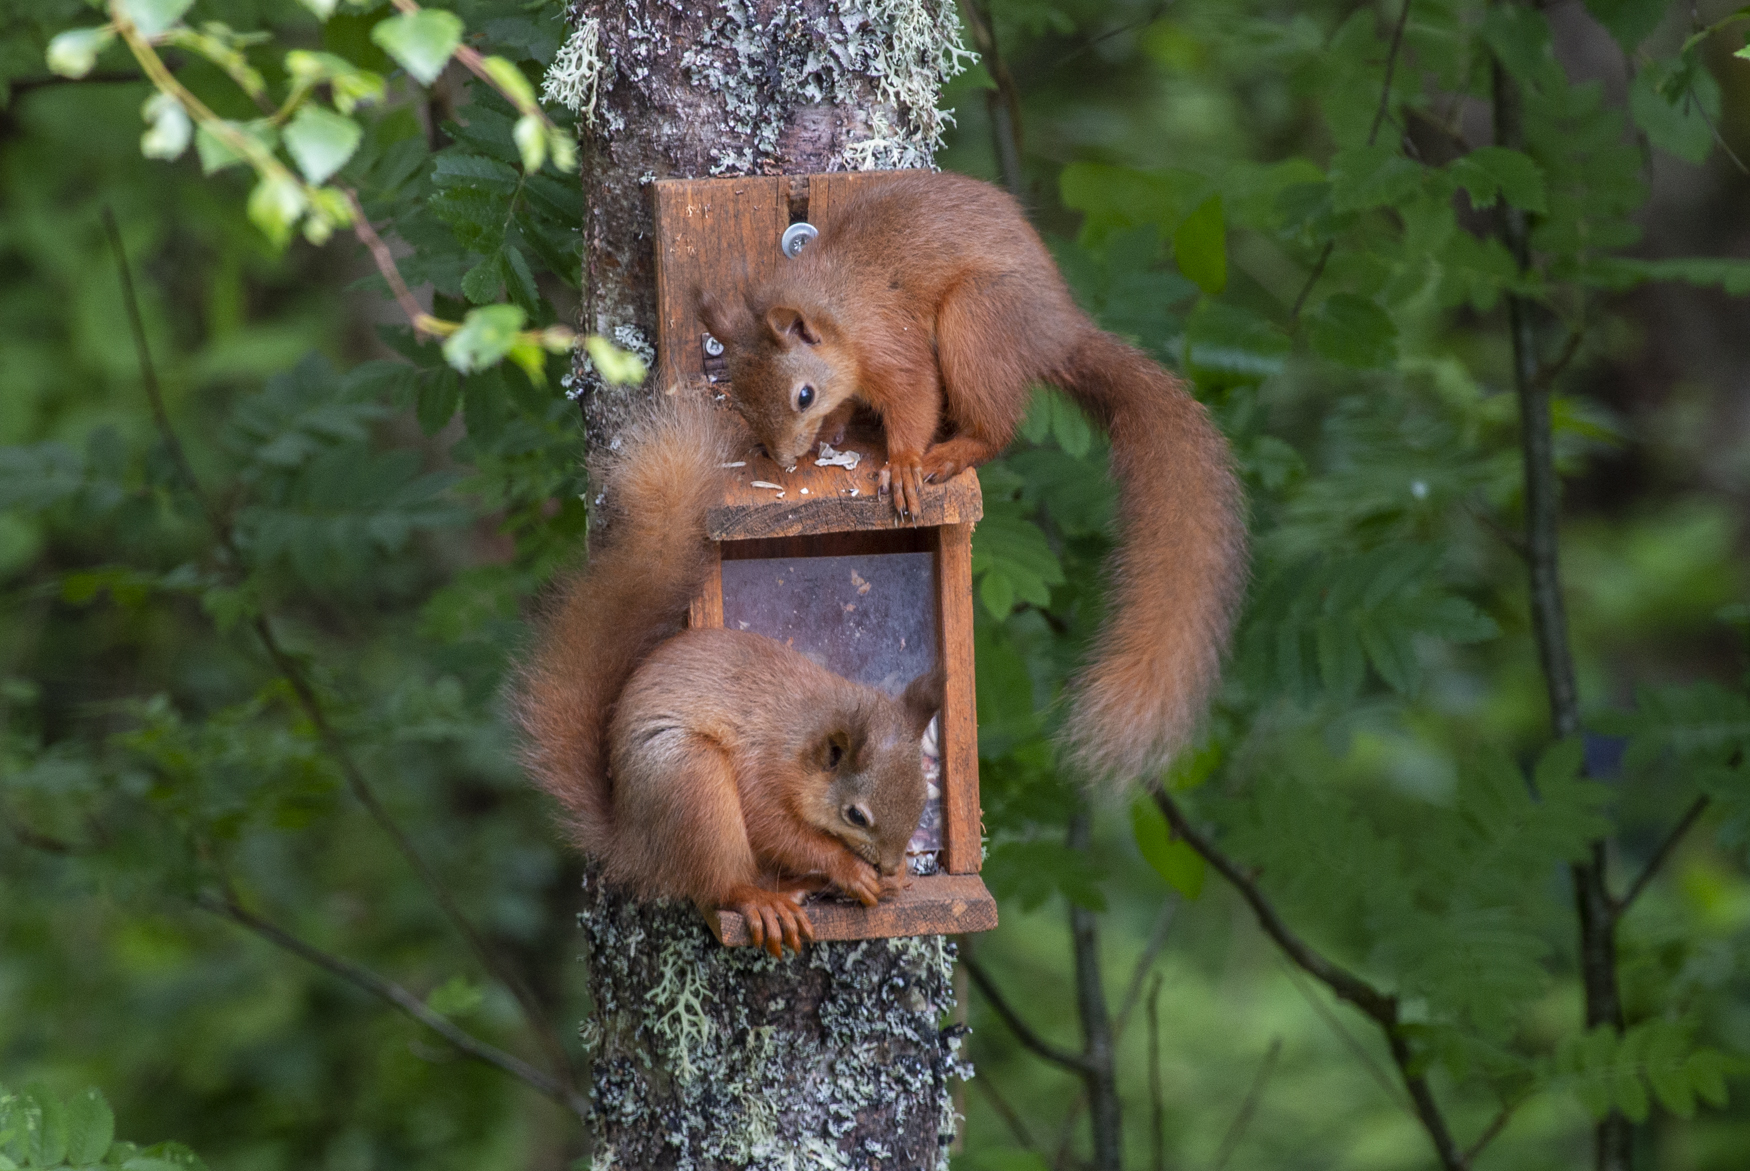 Youngsters playing on the squirrel feeder